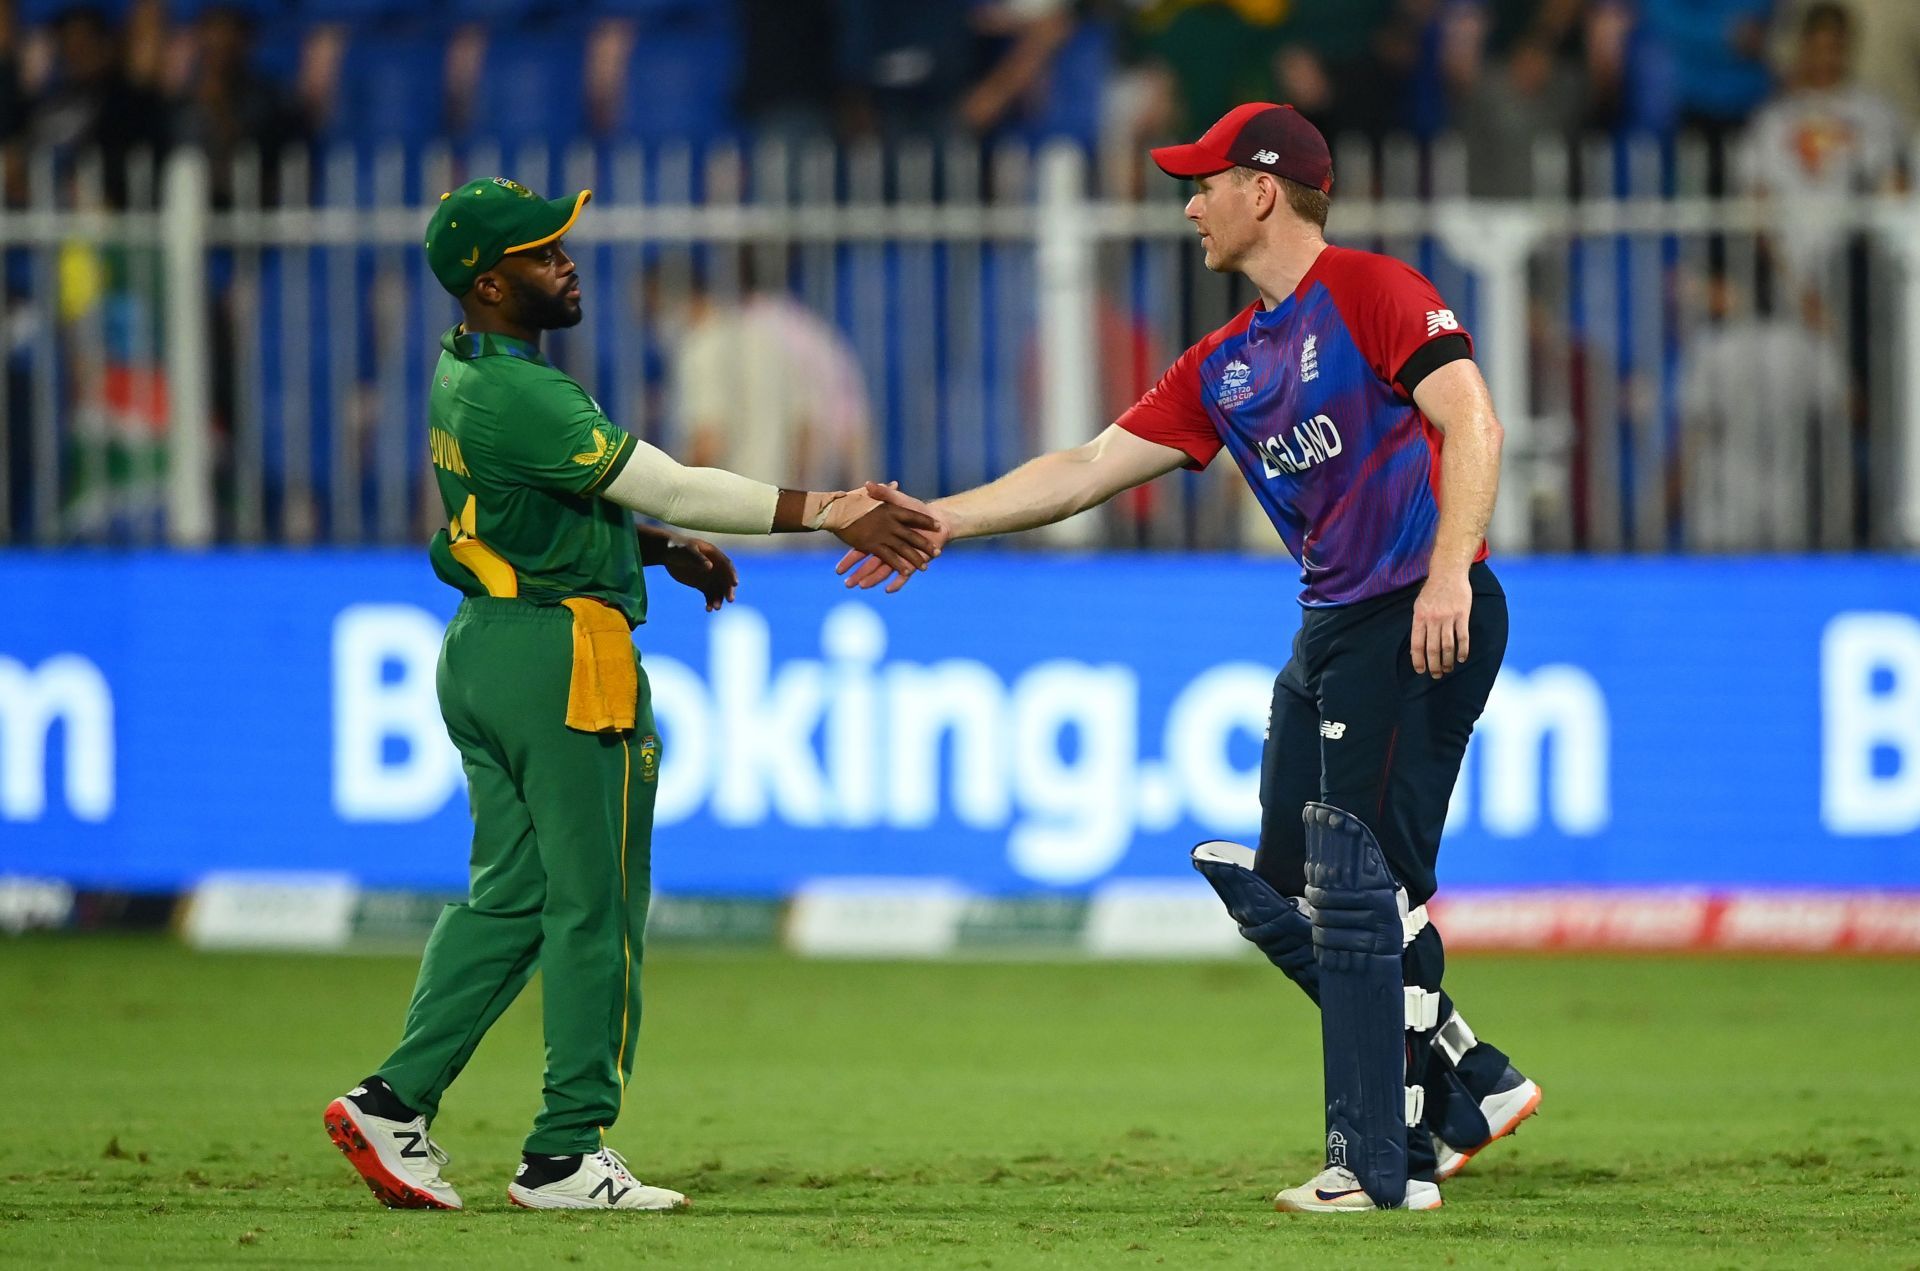 South Africa were unlucky to get eliminated even after they won four games including a victory over England. (pic: Getty Images)